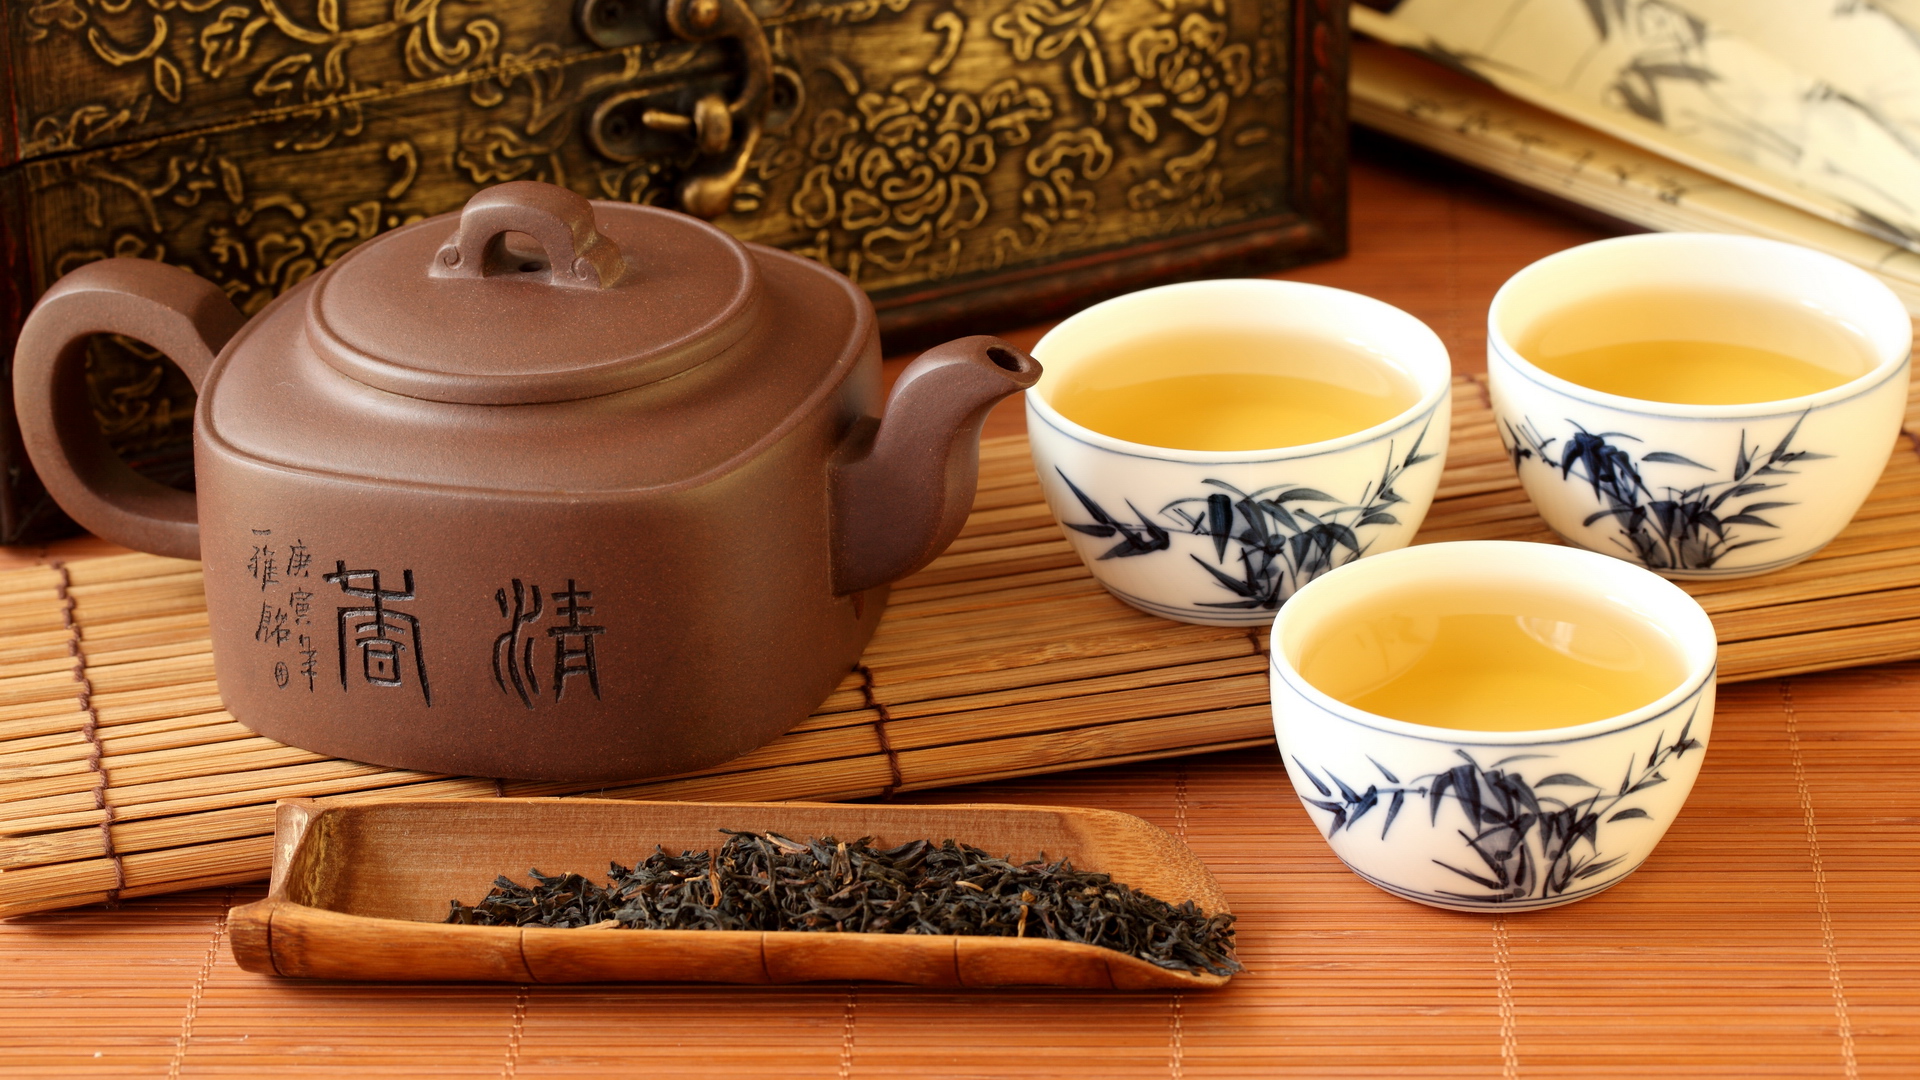 It's all about Chinese TEA - Taobao FOCUS